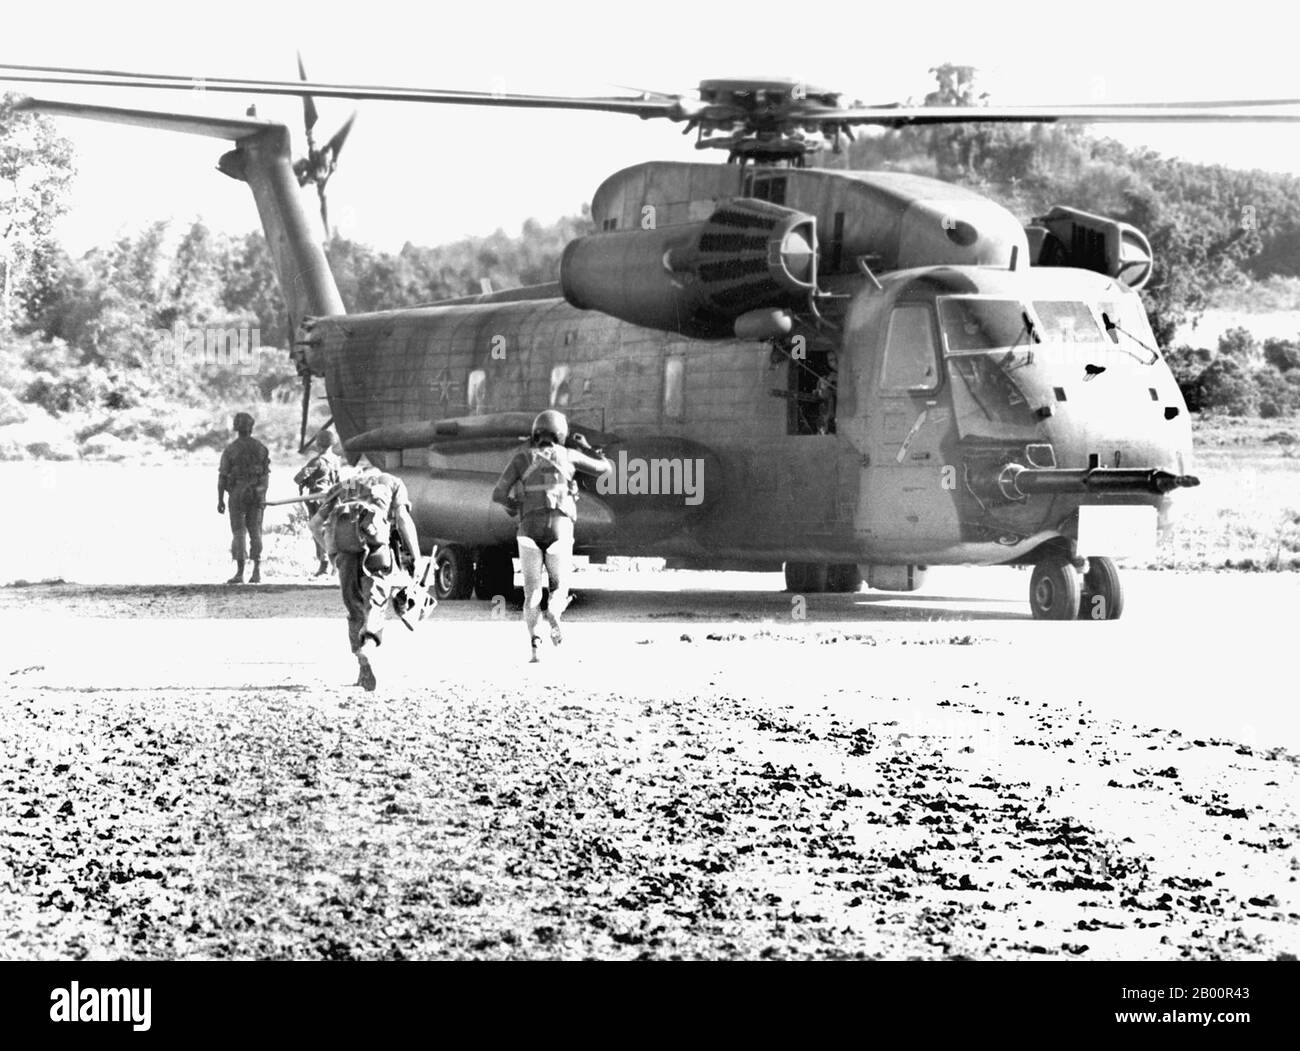 Cambodia: The Mayaguez Incident, May 12-15, 1975. A USAF soldier from the 40th Aerospace Rescue and Recovery Squadron guides Marines to an HH-53 helicopter.  On May 12, 1975, the Khmer Rouge seized the USS Mayaguez and its crew in Cambodian territorial waters as they were en route to Thailand. The US first launched a rescue mission that ended in disaster after a helicopter crashed. A massive assault was launched on May 14-15 and the majority of the crew were rescued from the island of Koh Tang, but not before both sides had lost over a dozen casualties. Stock Photo